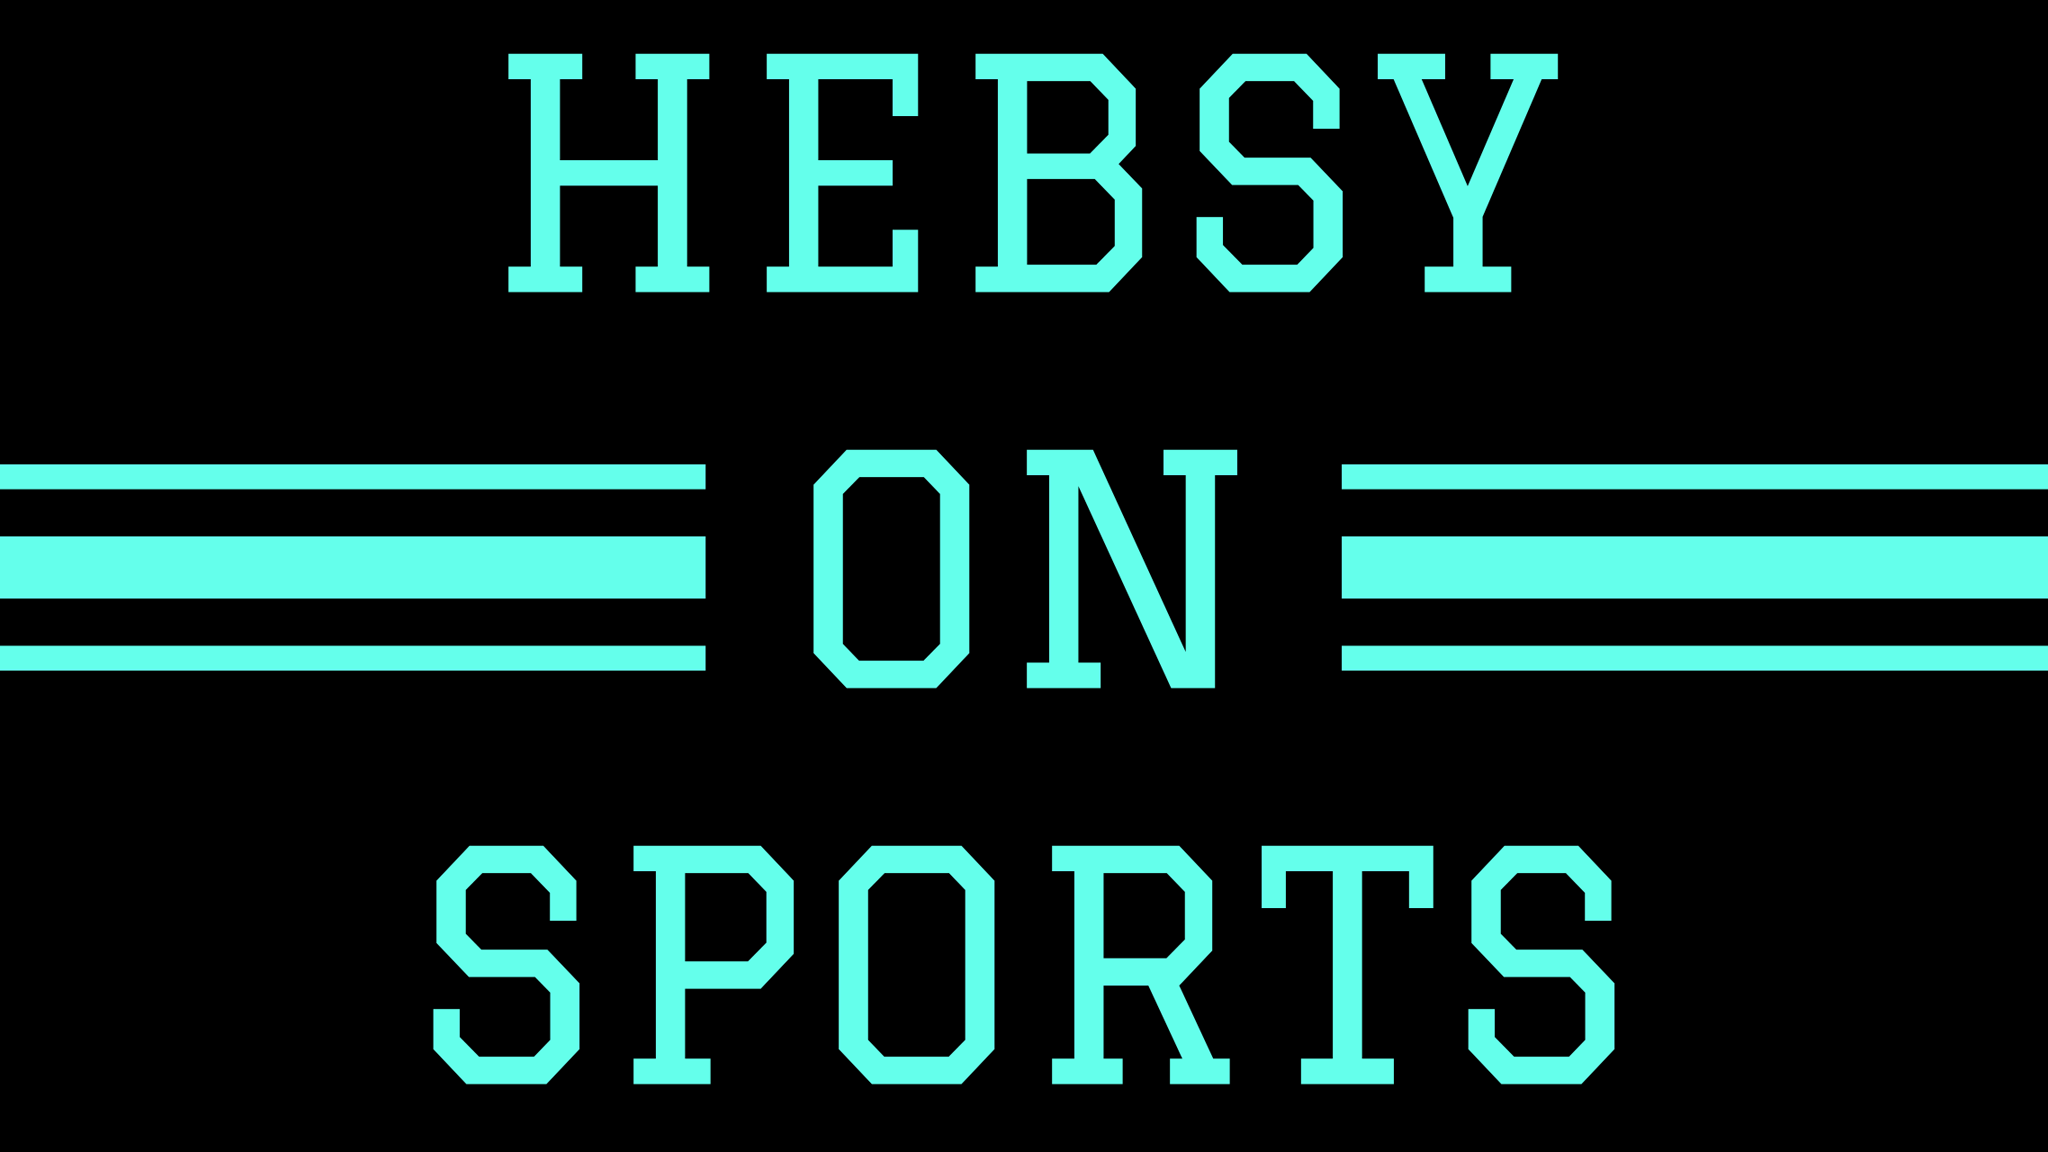 Hebsy on Sports for June 18, 2021